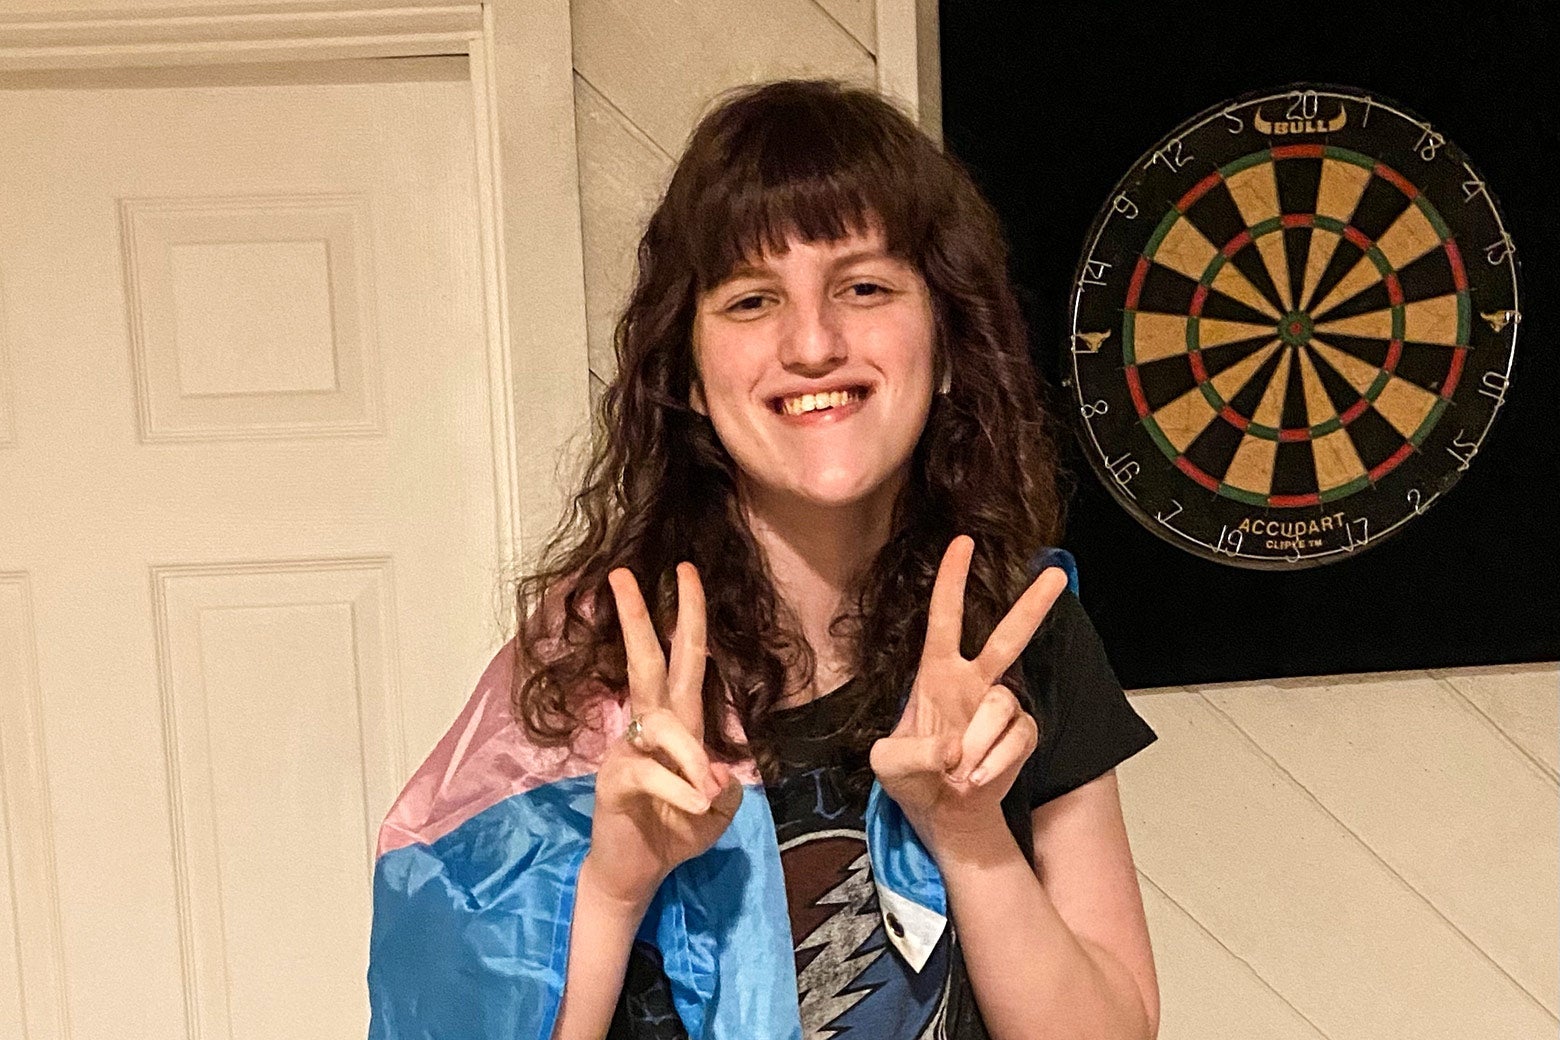 Esmée Silverman, smiling, holds her hands in peace signs and wears a transgender flag draped over her shoulders.